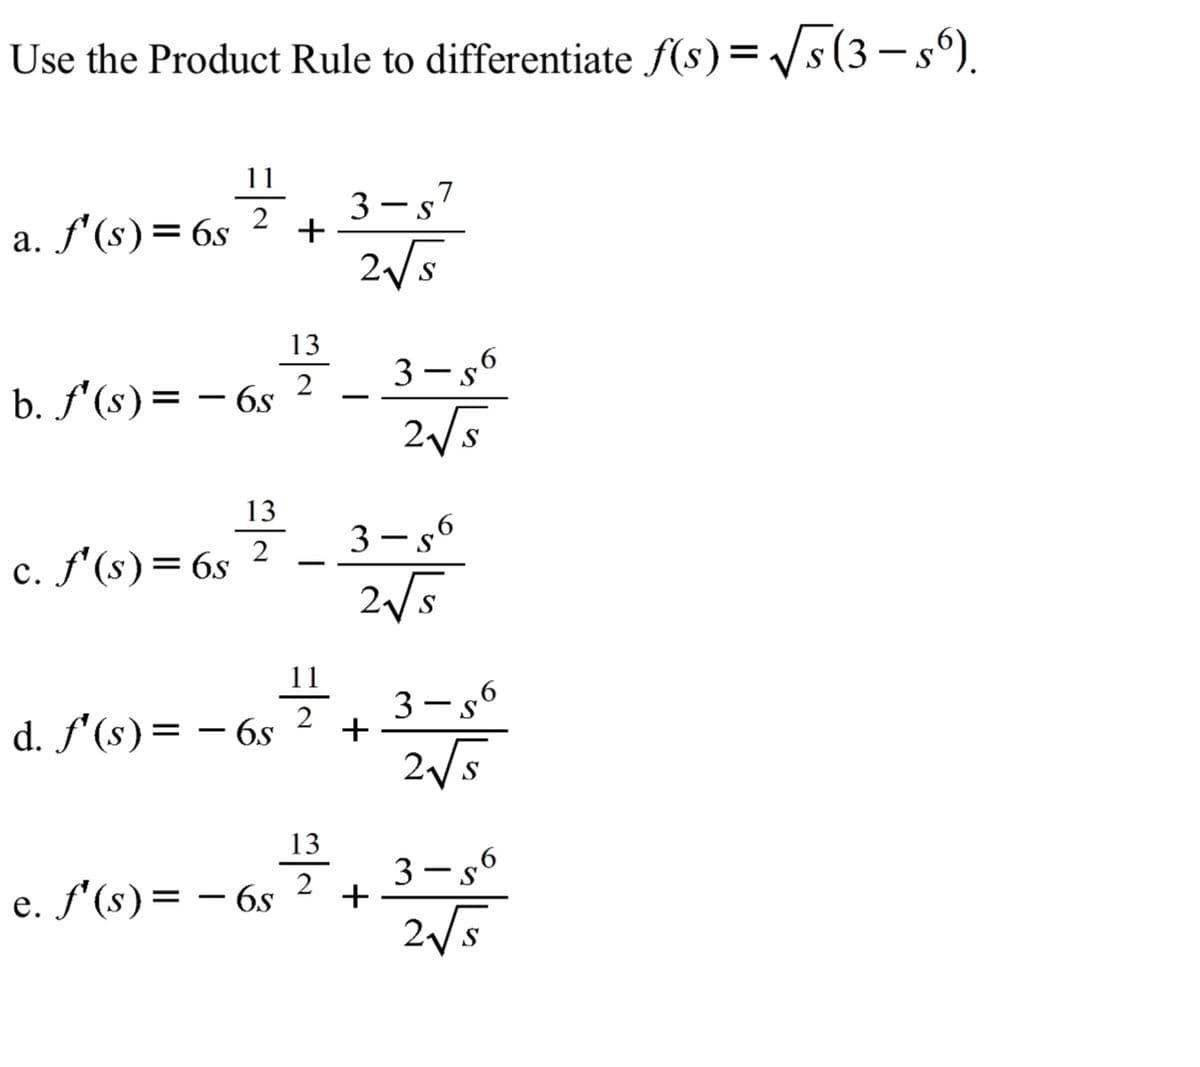 Use the Product Rule to differentiate f(s)= /s(3– s°).
11
3 -s7
2
a. f'(s)= 6s
+
2/5
13
2
b. f'(s)= – 6s
2/5
13
3- s6
2
c. f'(s)= 6s
2/5
11
3 - s°
d. f'(s)= – 6s
2/5
13
3-s6
2
e. f'(s)= – 6s
+
25
